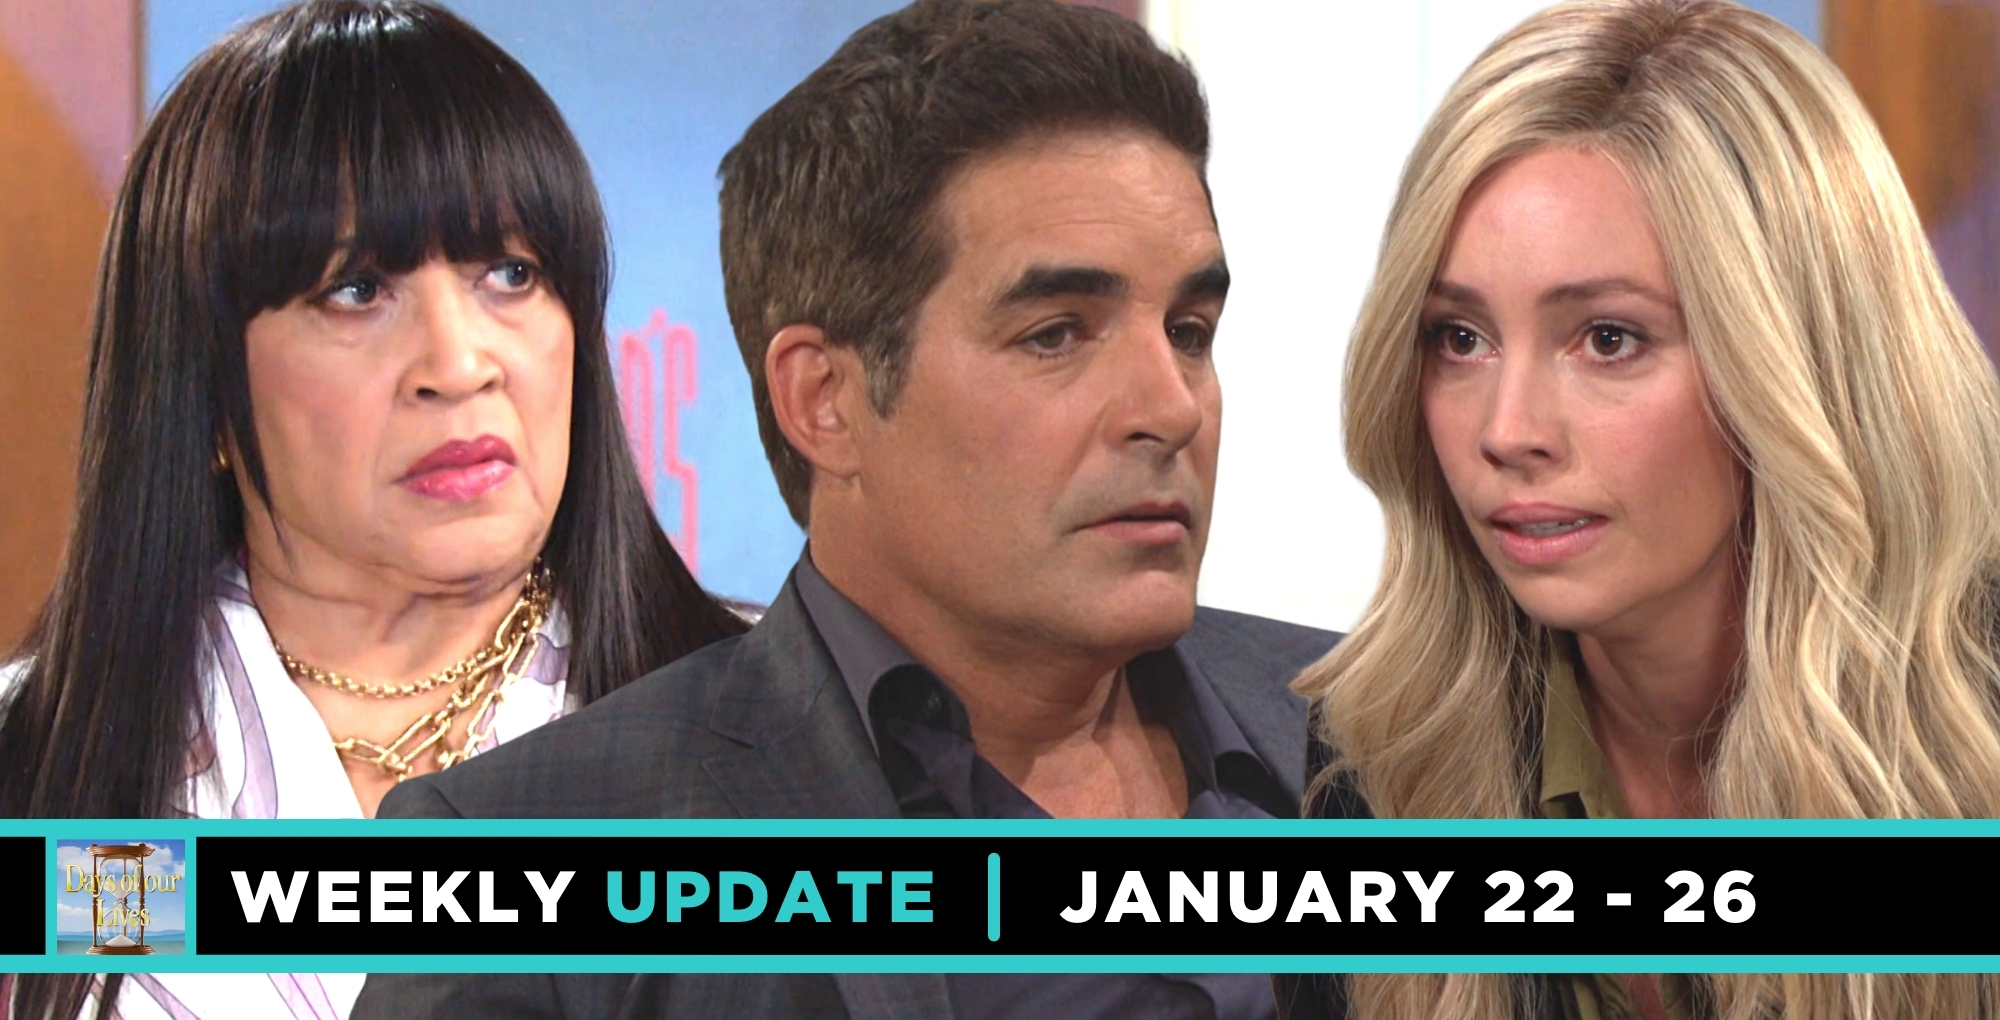 days spoilers weekly update for january 22-26, paulina, rafe, and theresa.